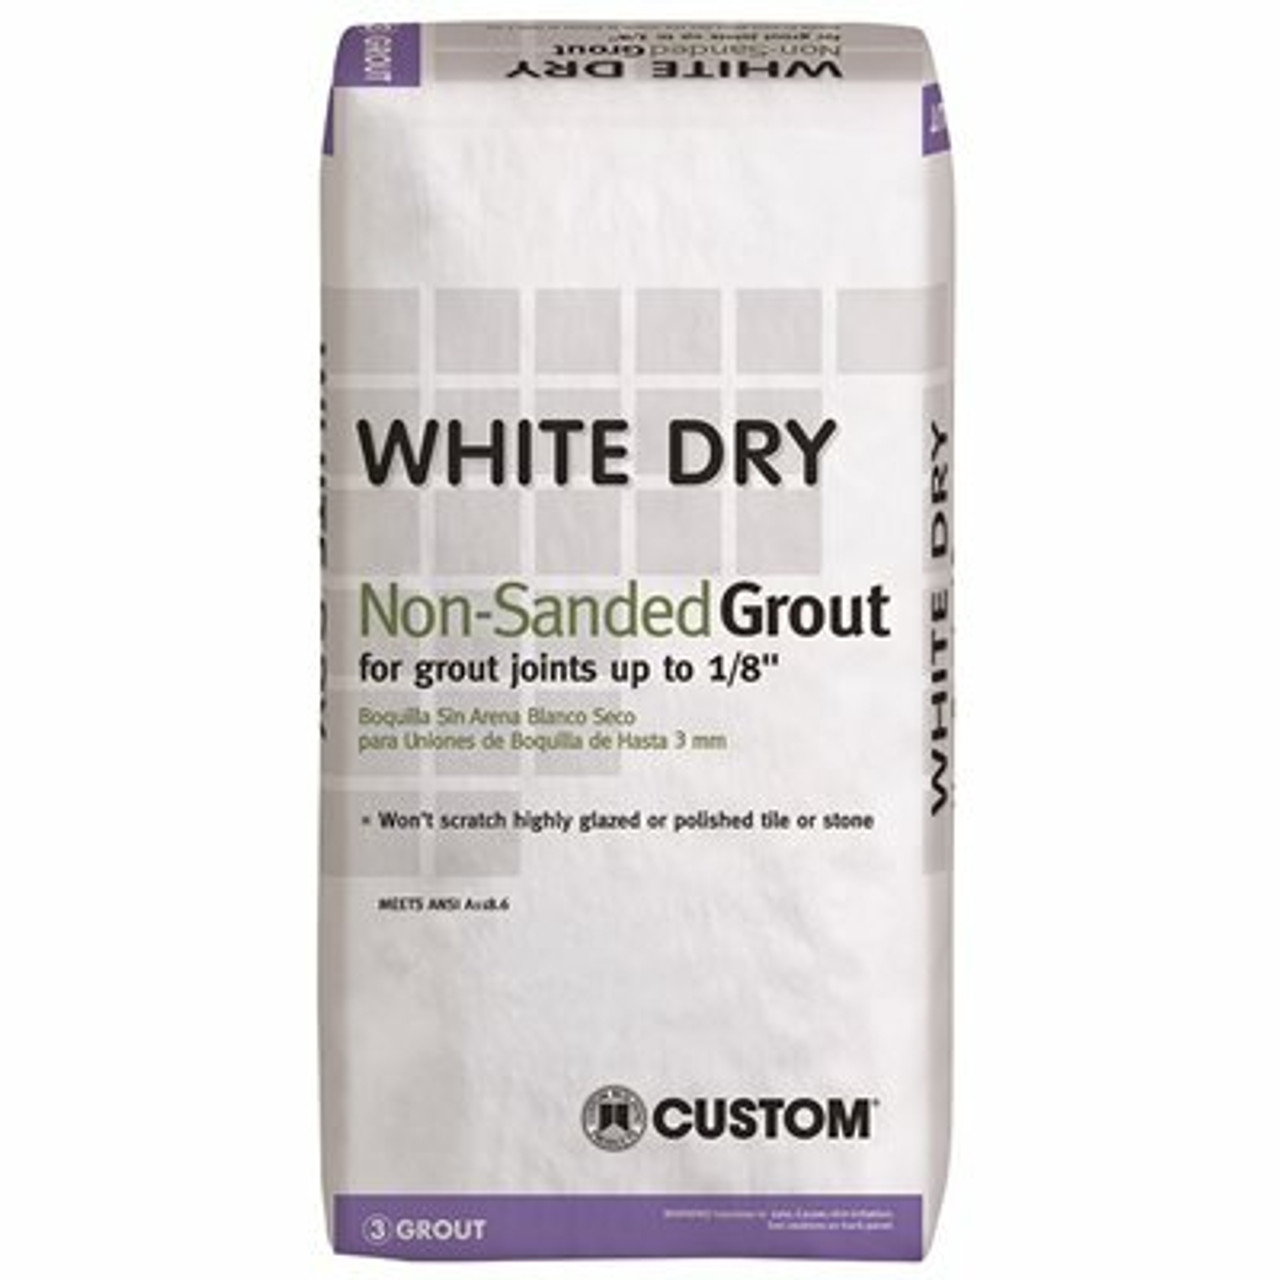 Custom Building Products White Dry 25 Lbs. Non-Sanded Grout